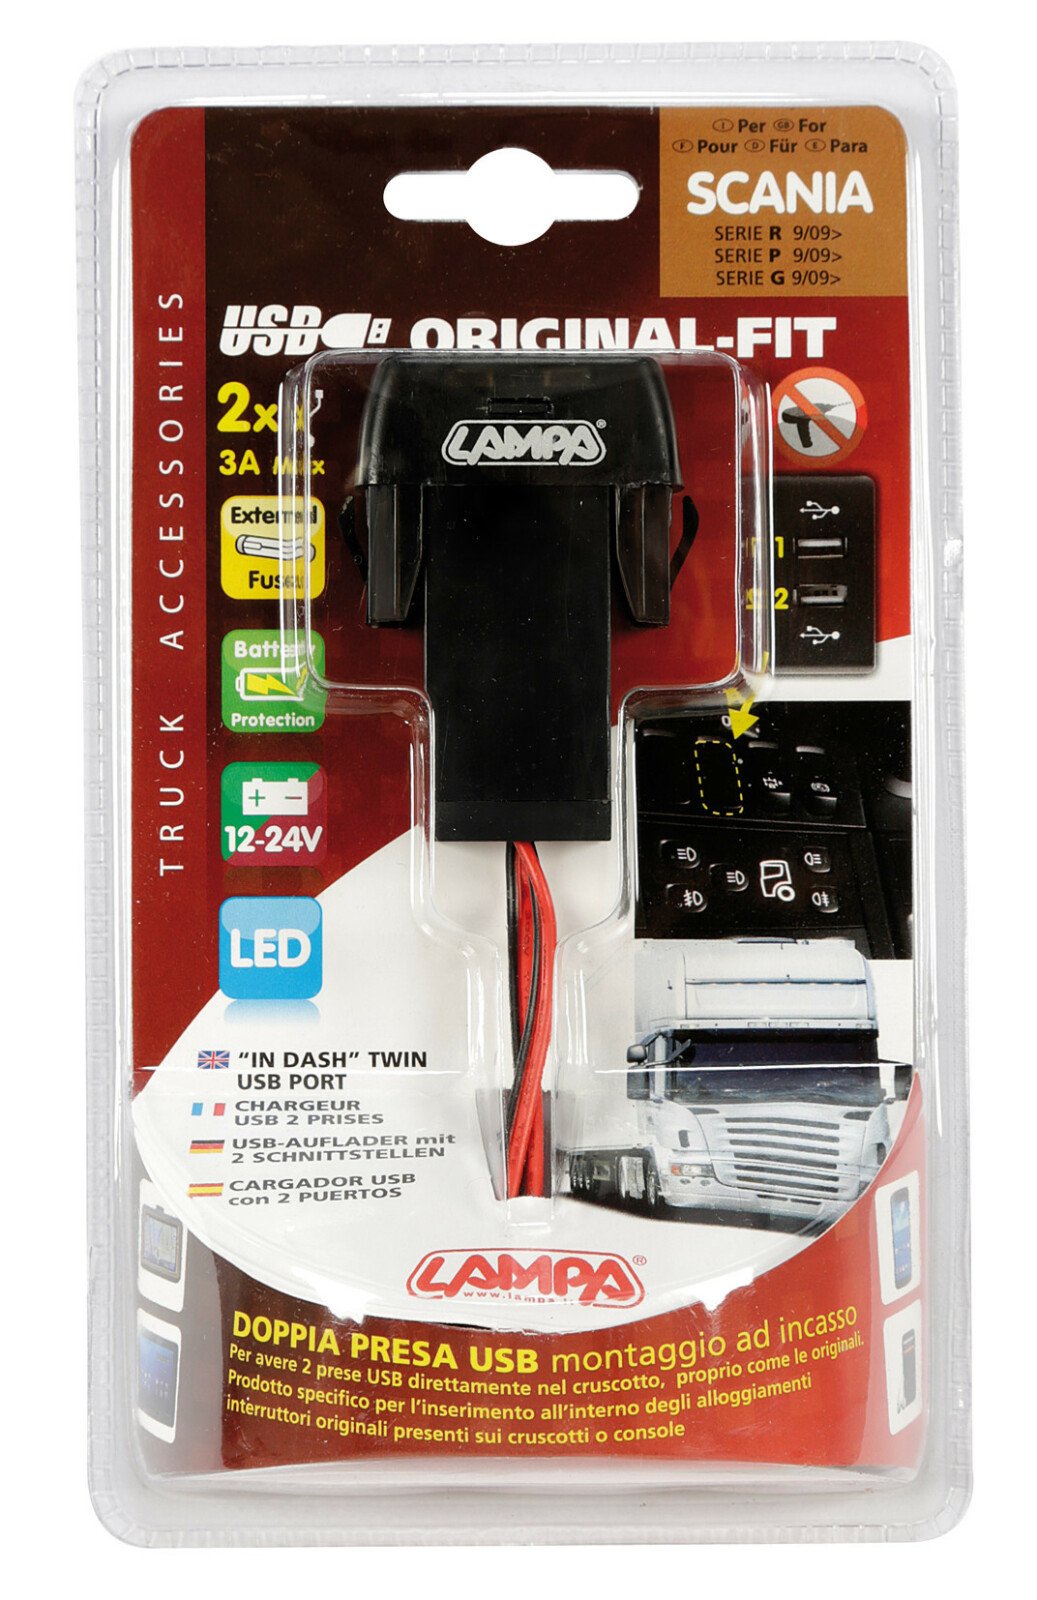 Original-Fit, double USB charger, 12/24V - Scania thumb